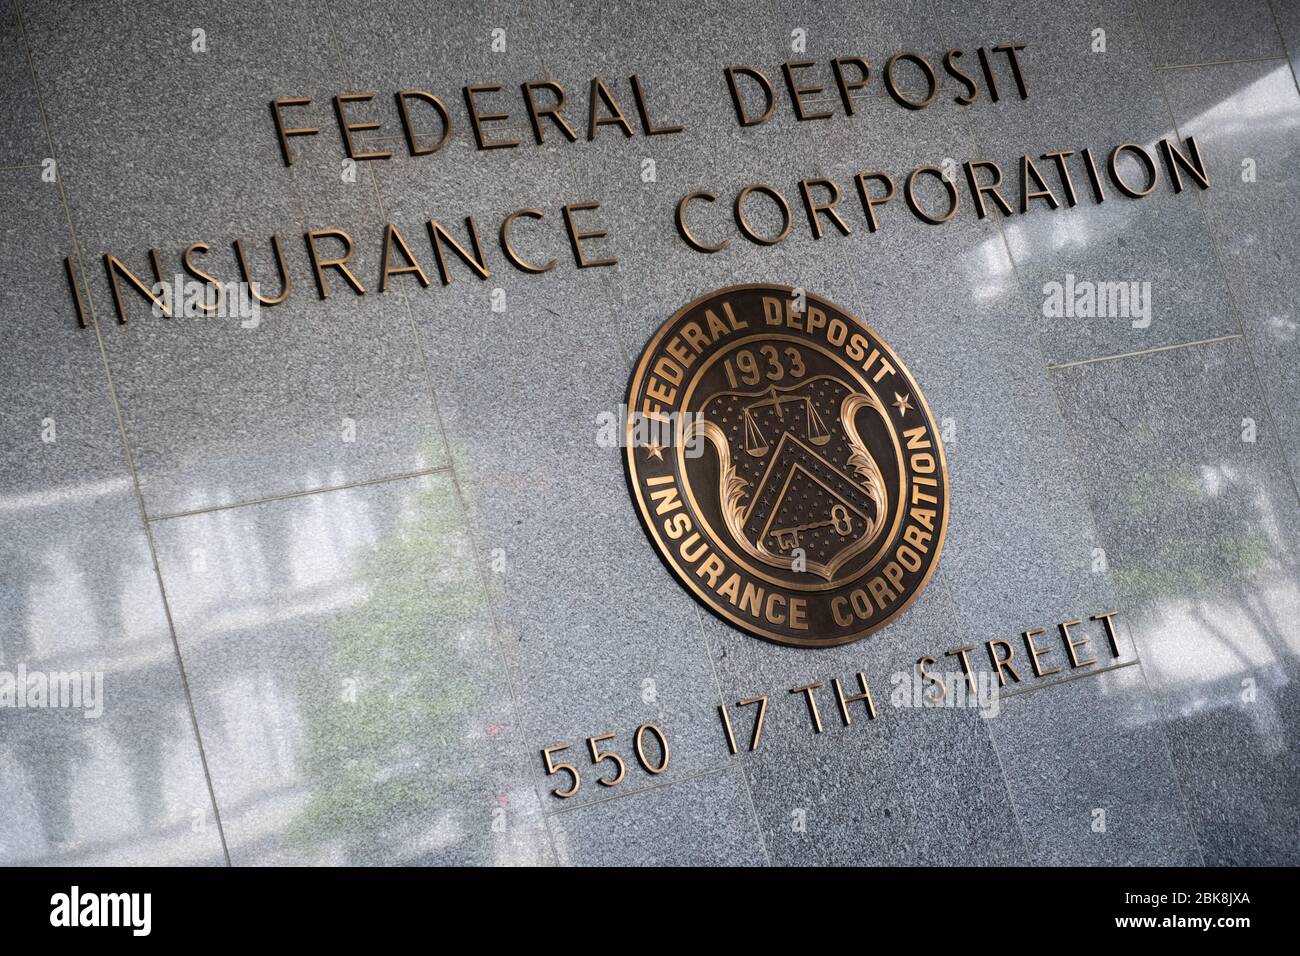 Fdic Logo High Resolution Stock Photography And Images Alamy